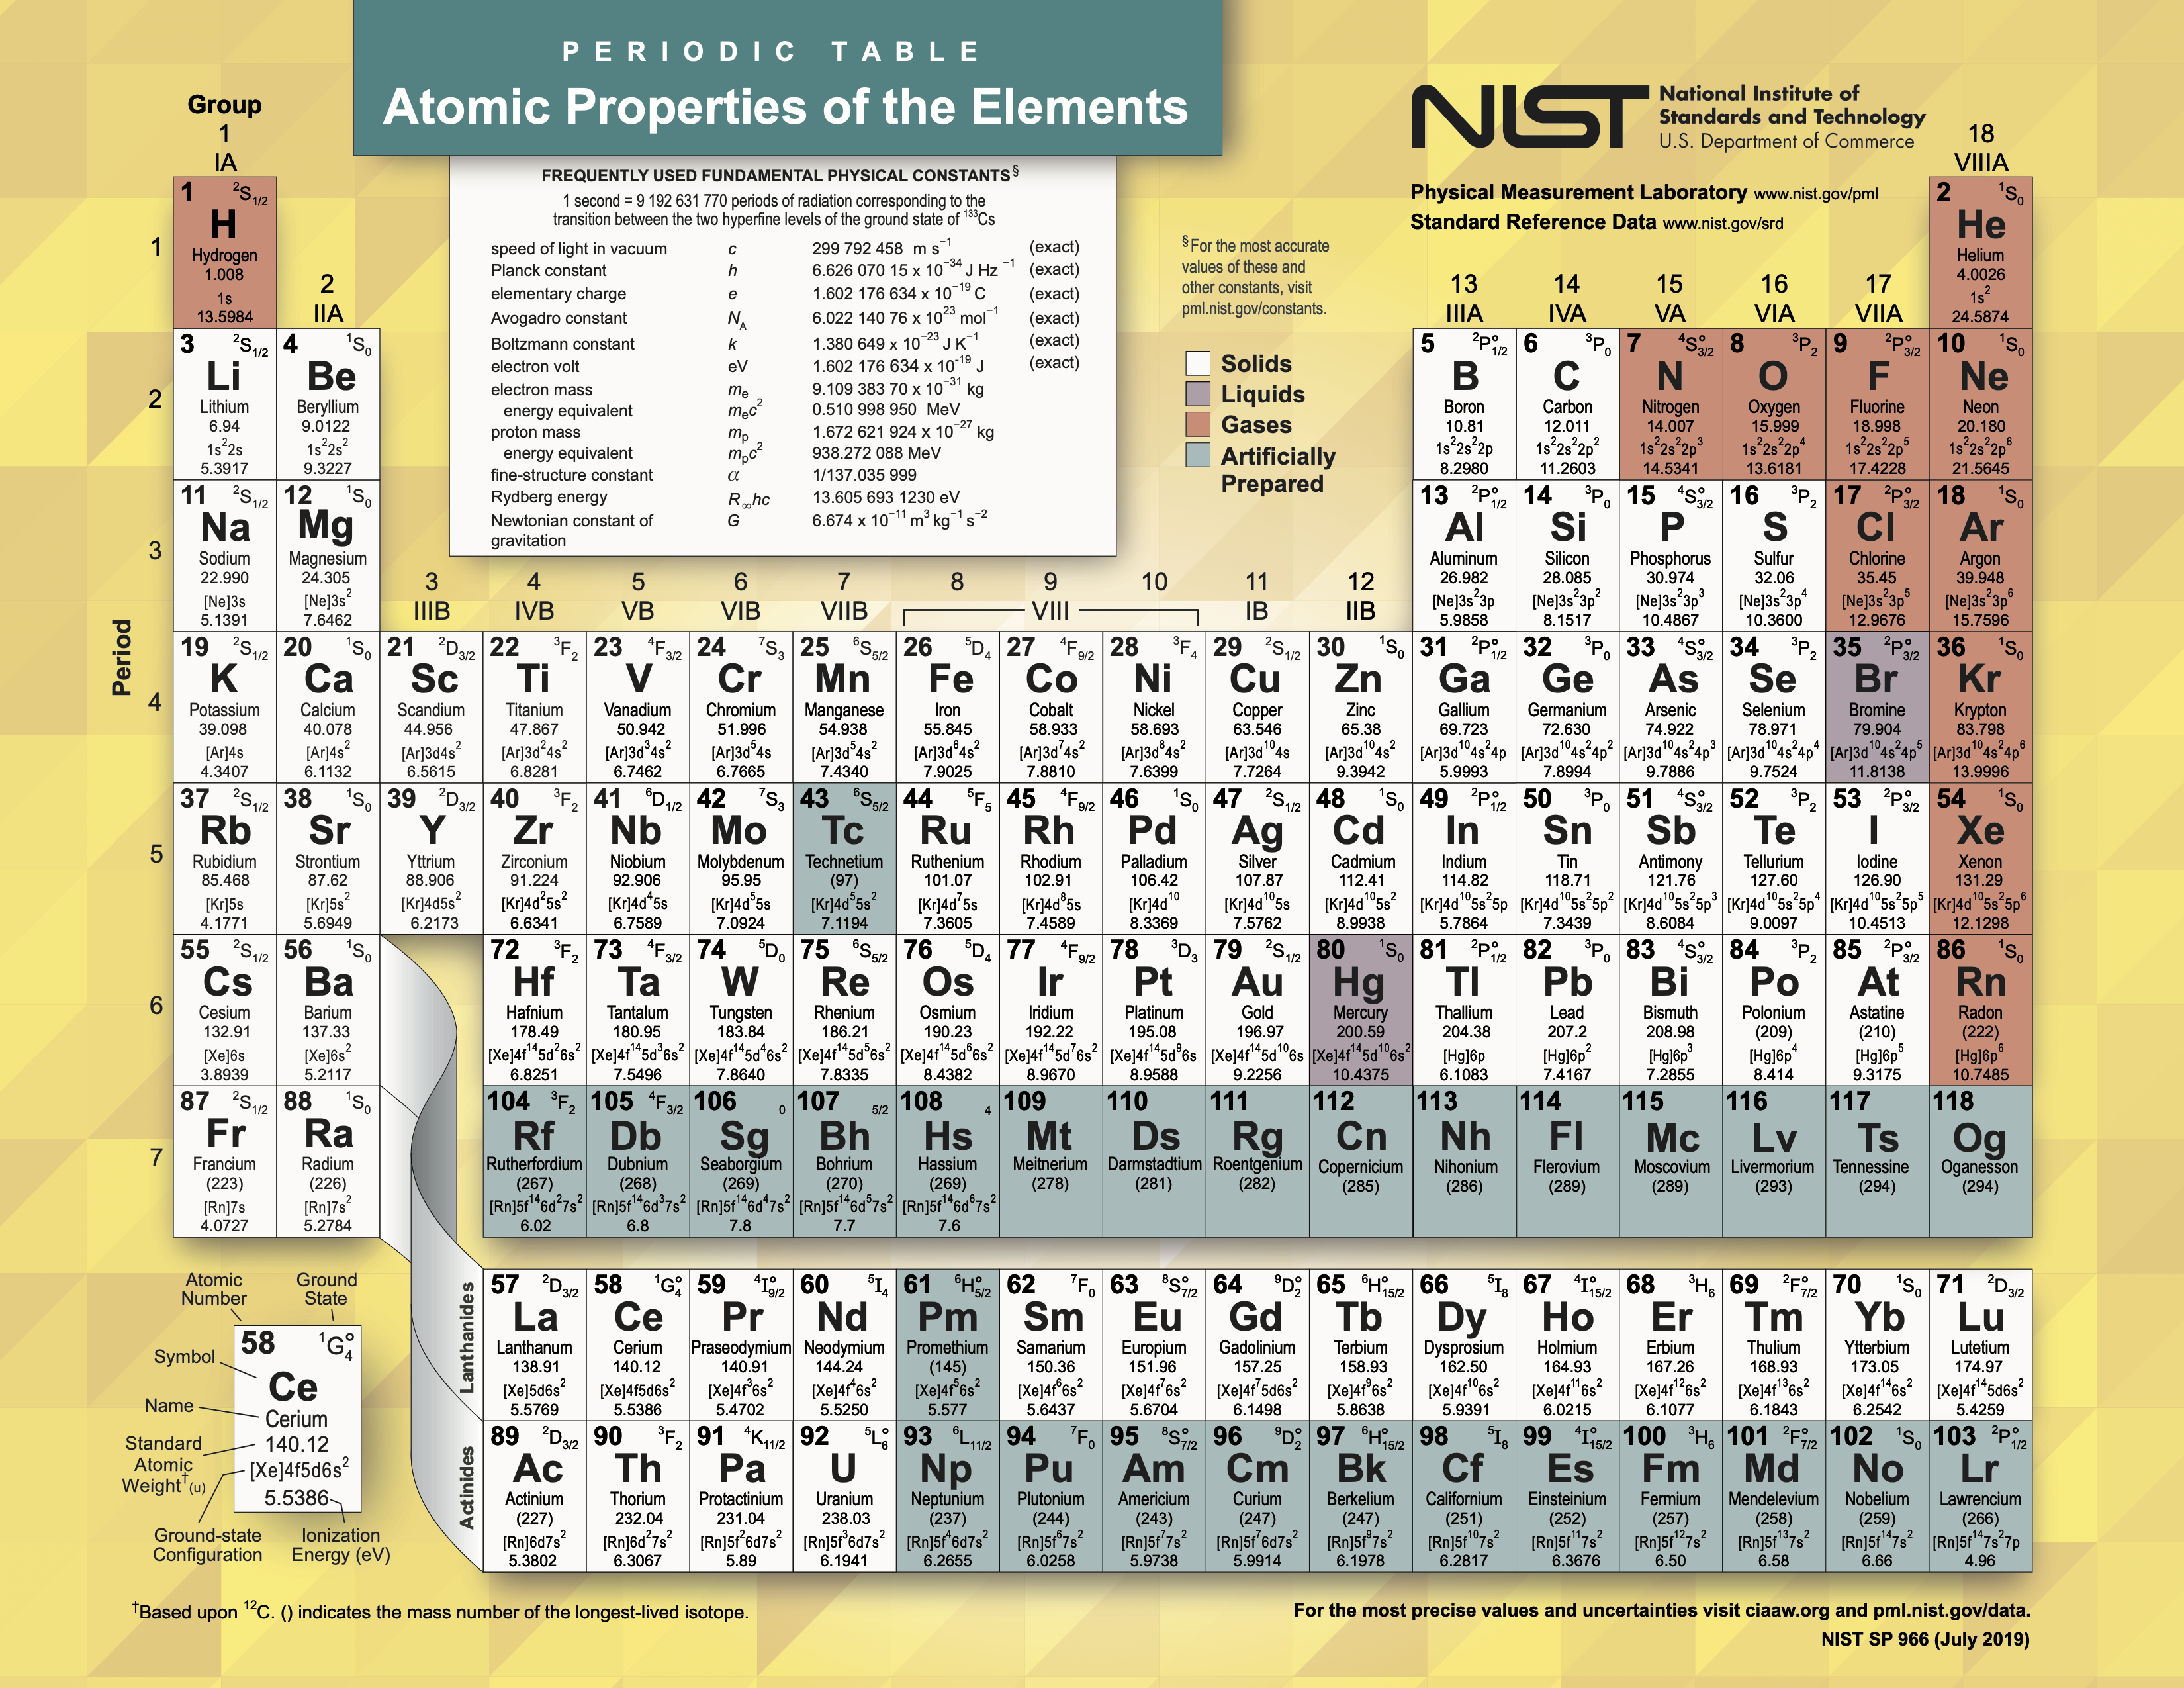 Modern periodic table form NIST. 